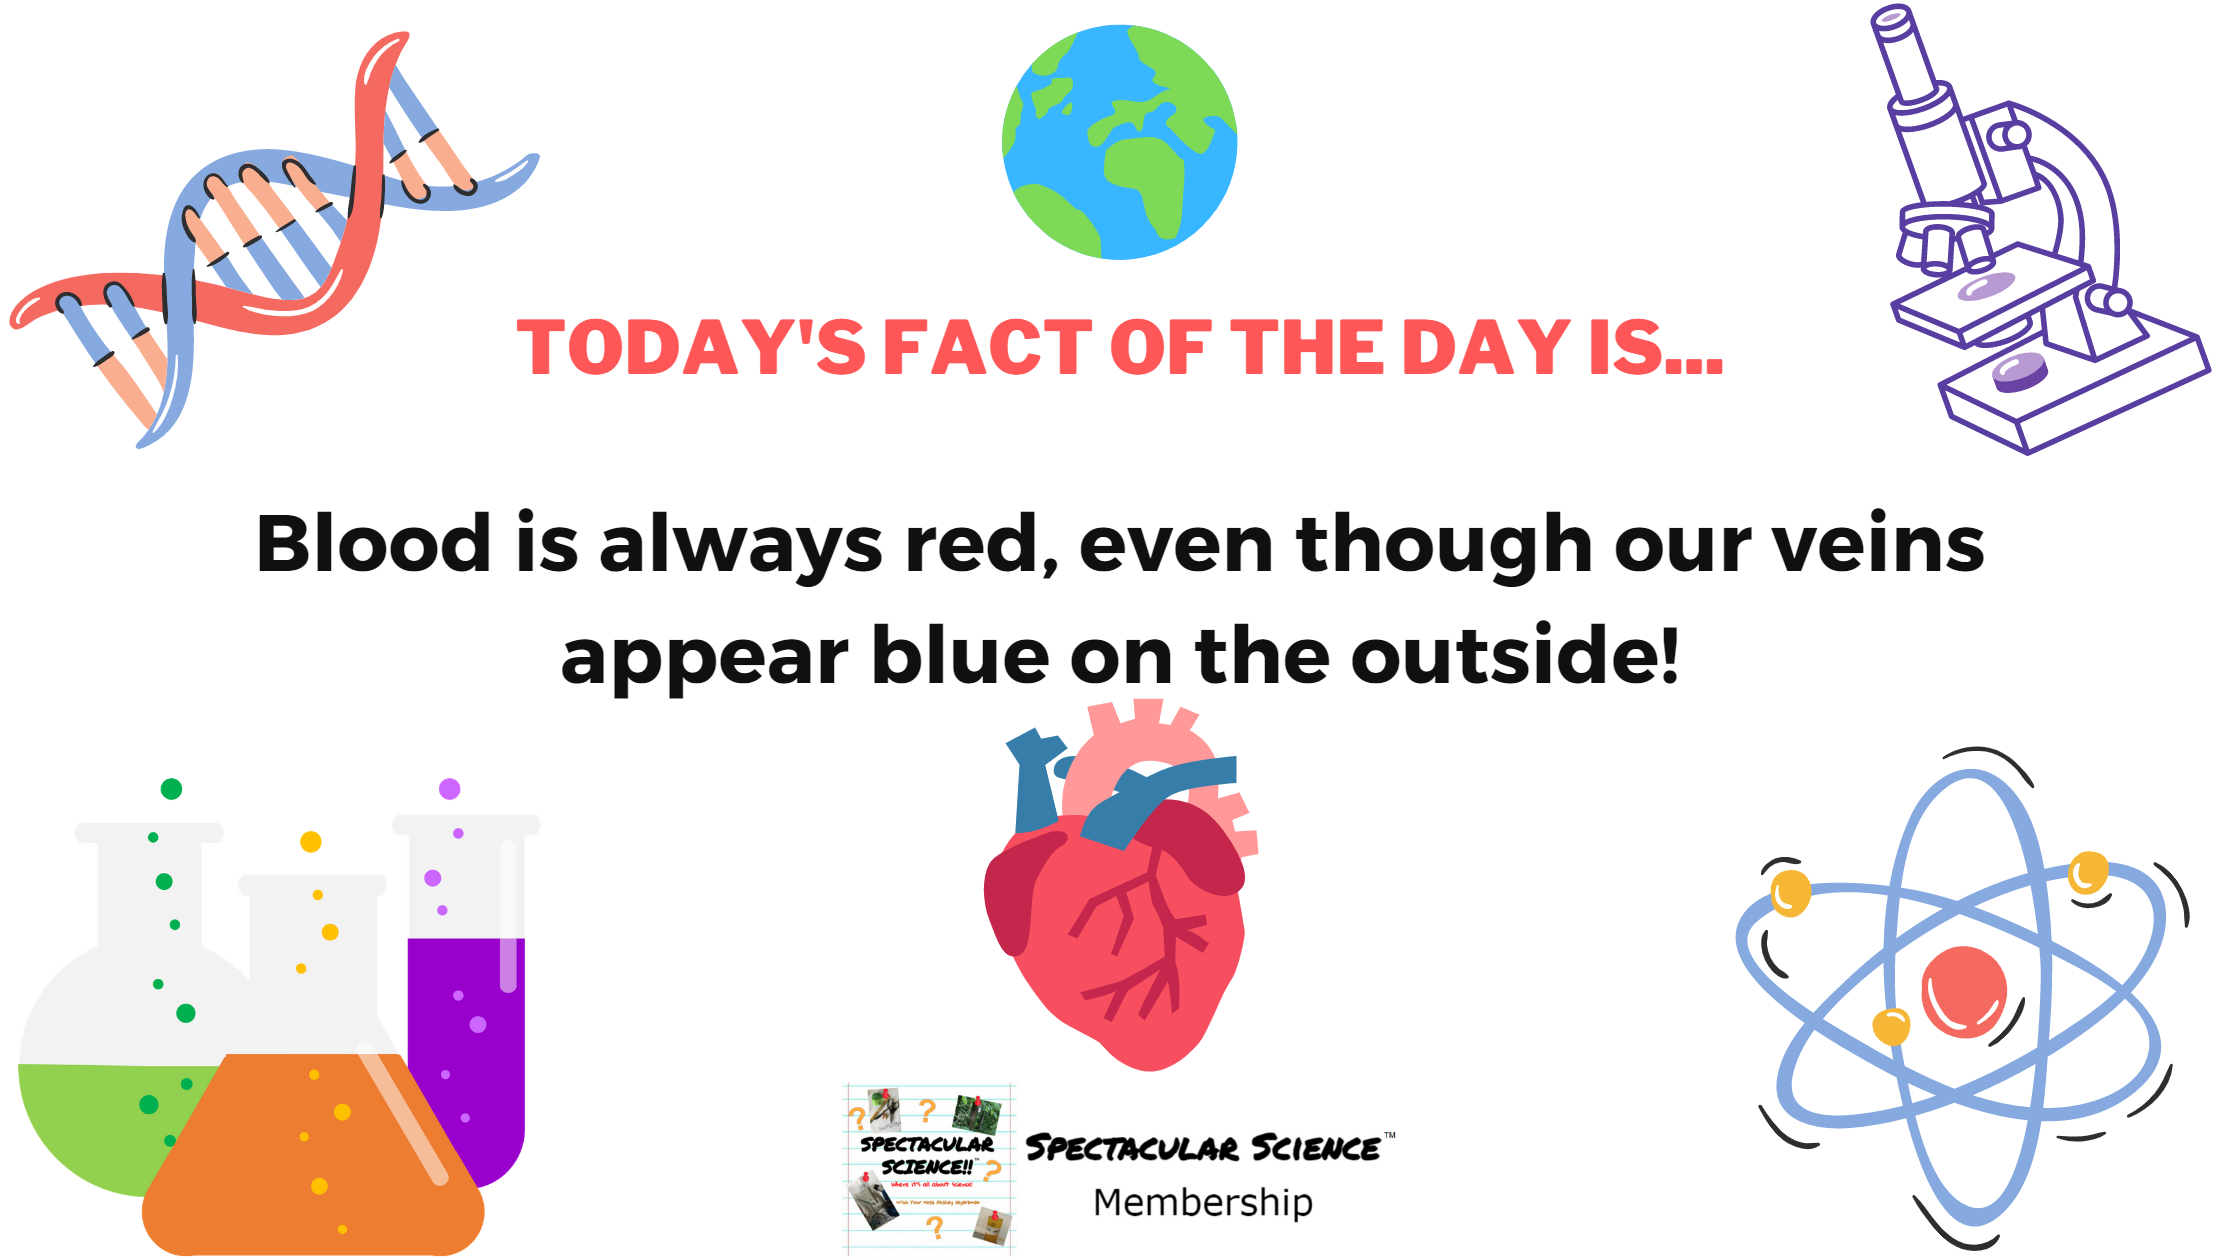 Fact of the Day Image January 19th